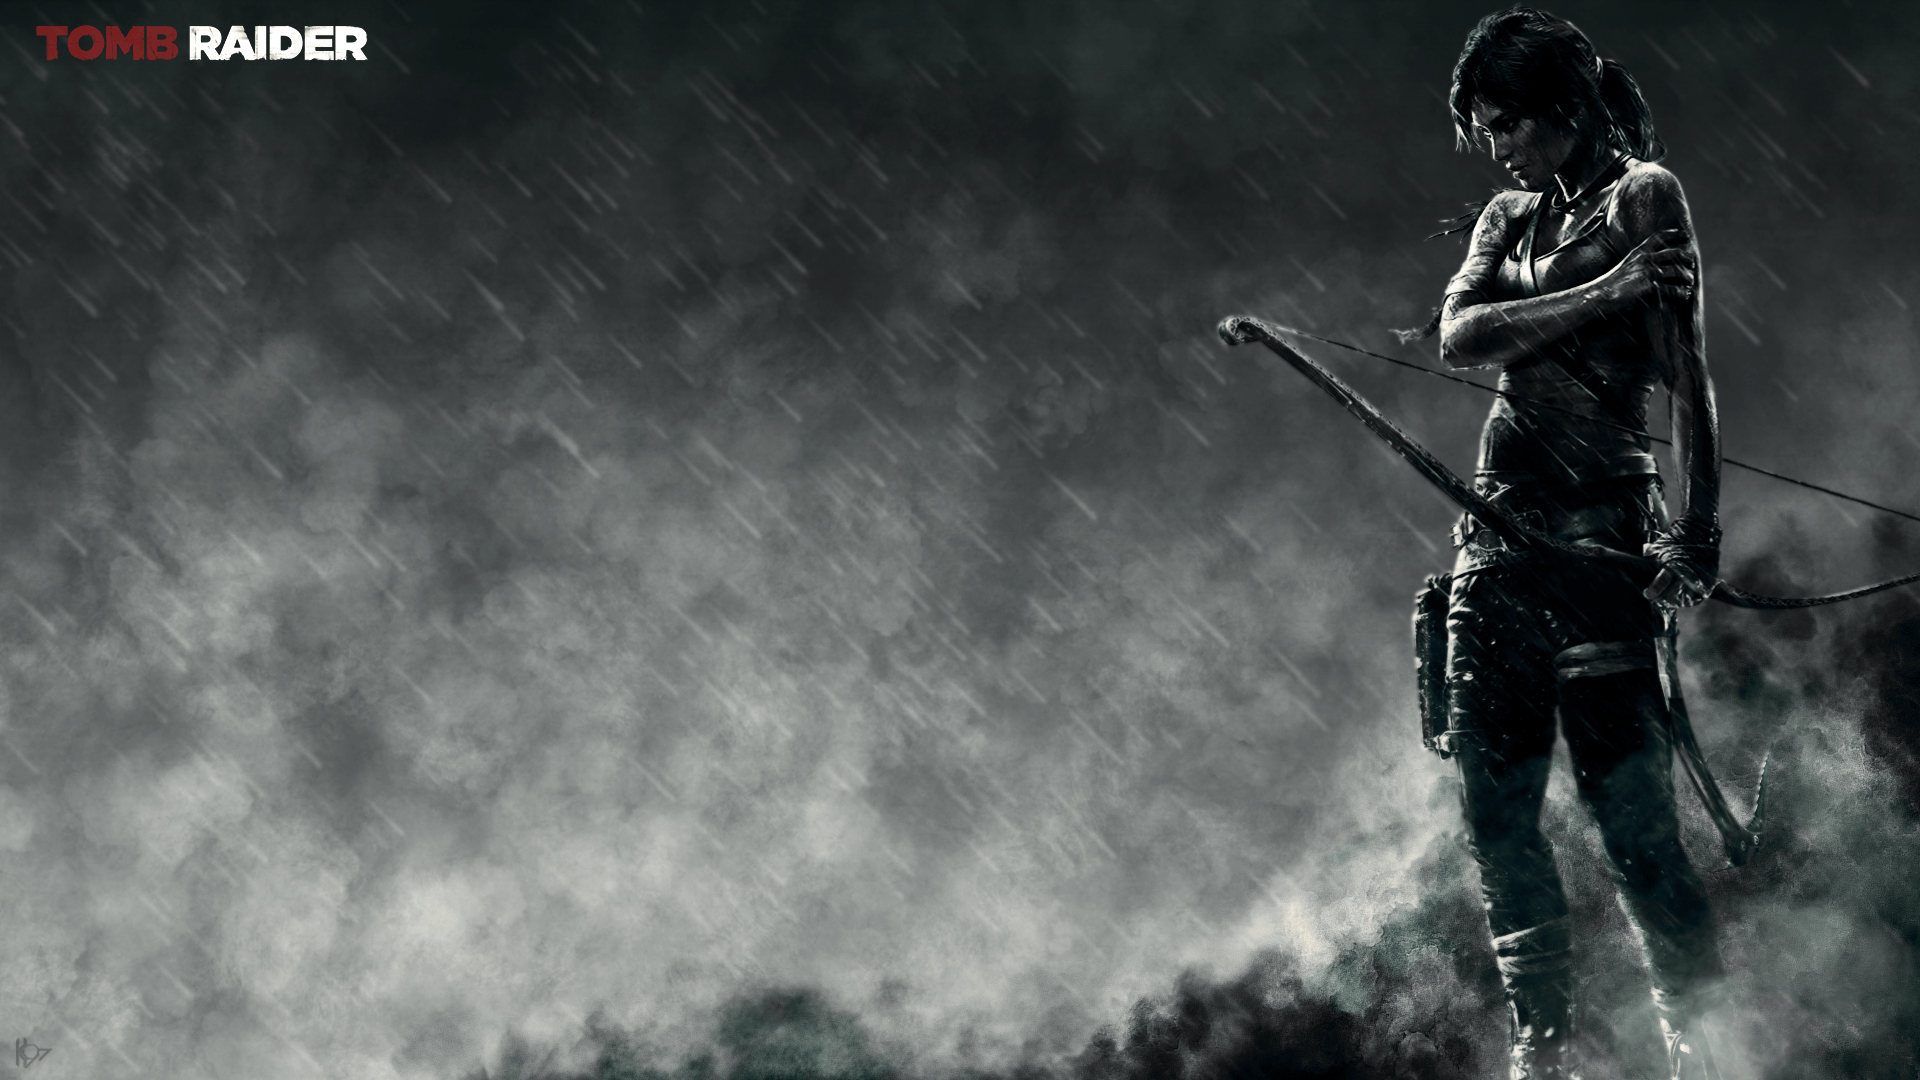 Tomb Raider HD Wallpapers High Quality 